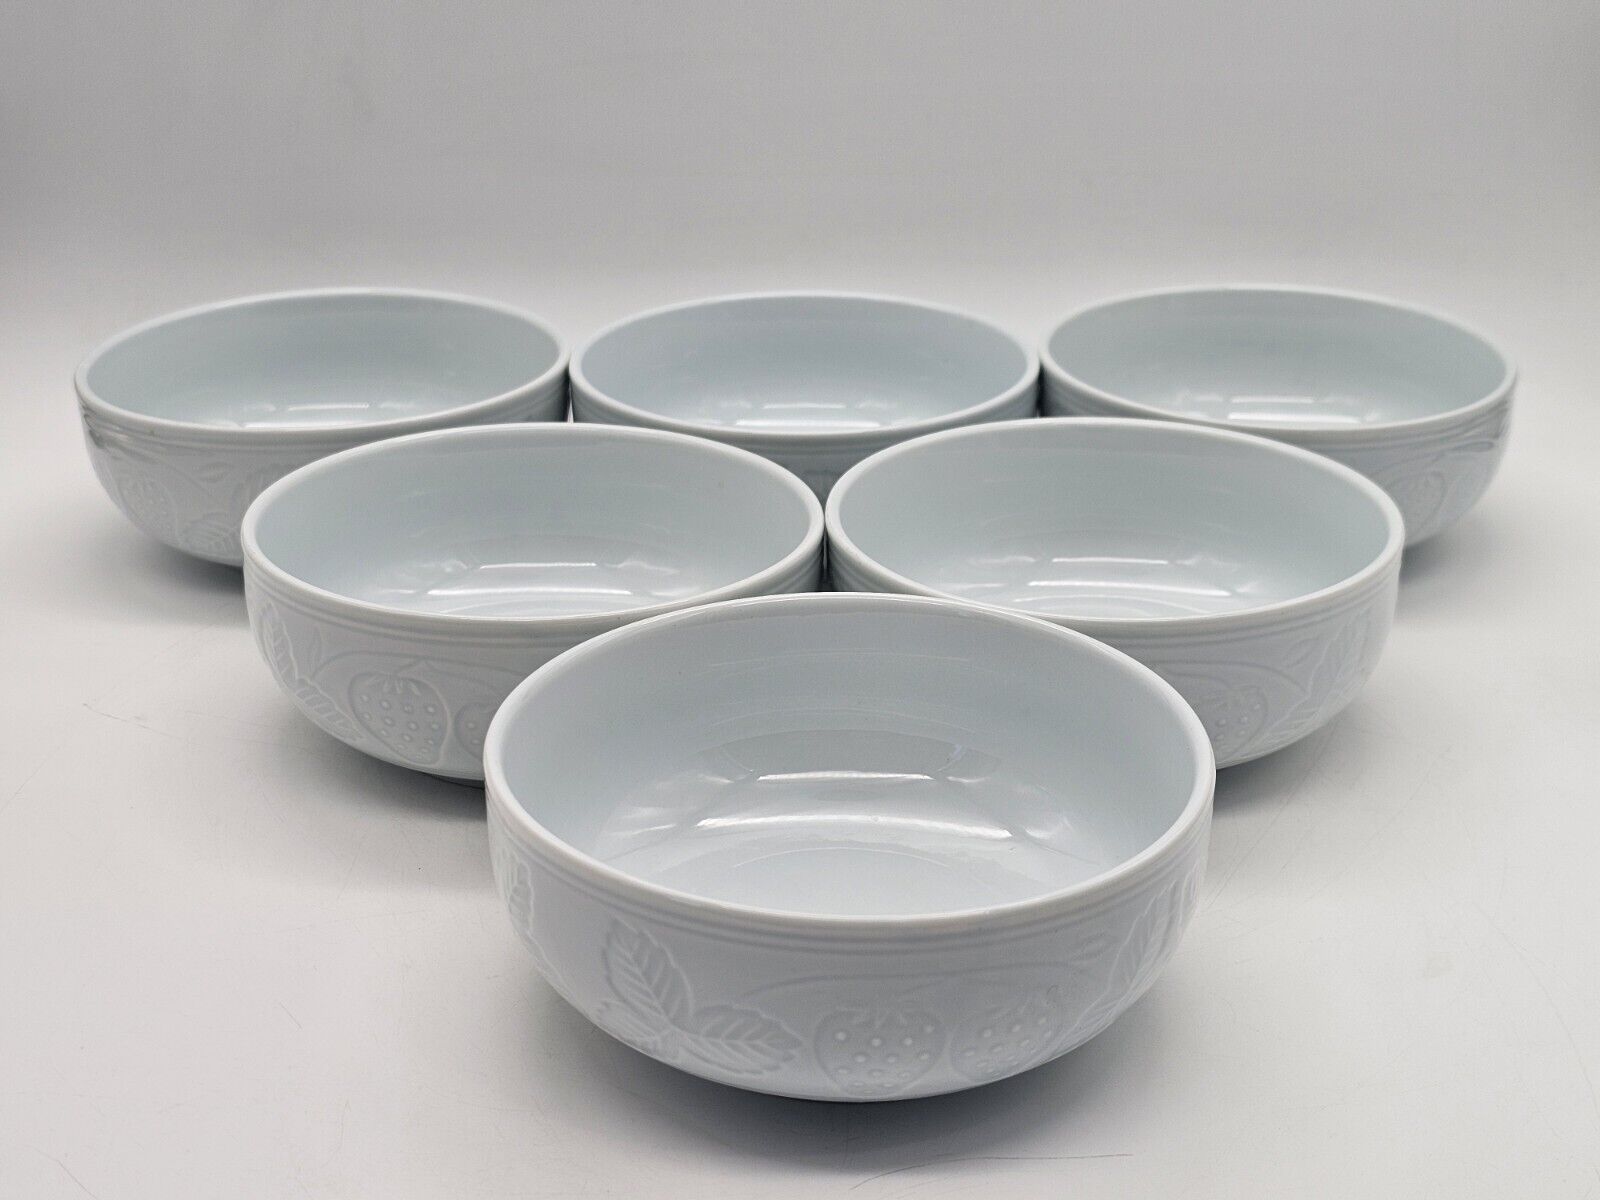 Korean Celadon Porcelain Bowl with Struberry and Leaves 5.5” set Of 6